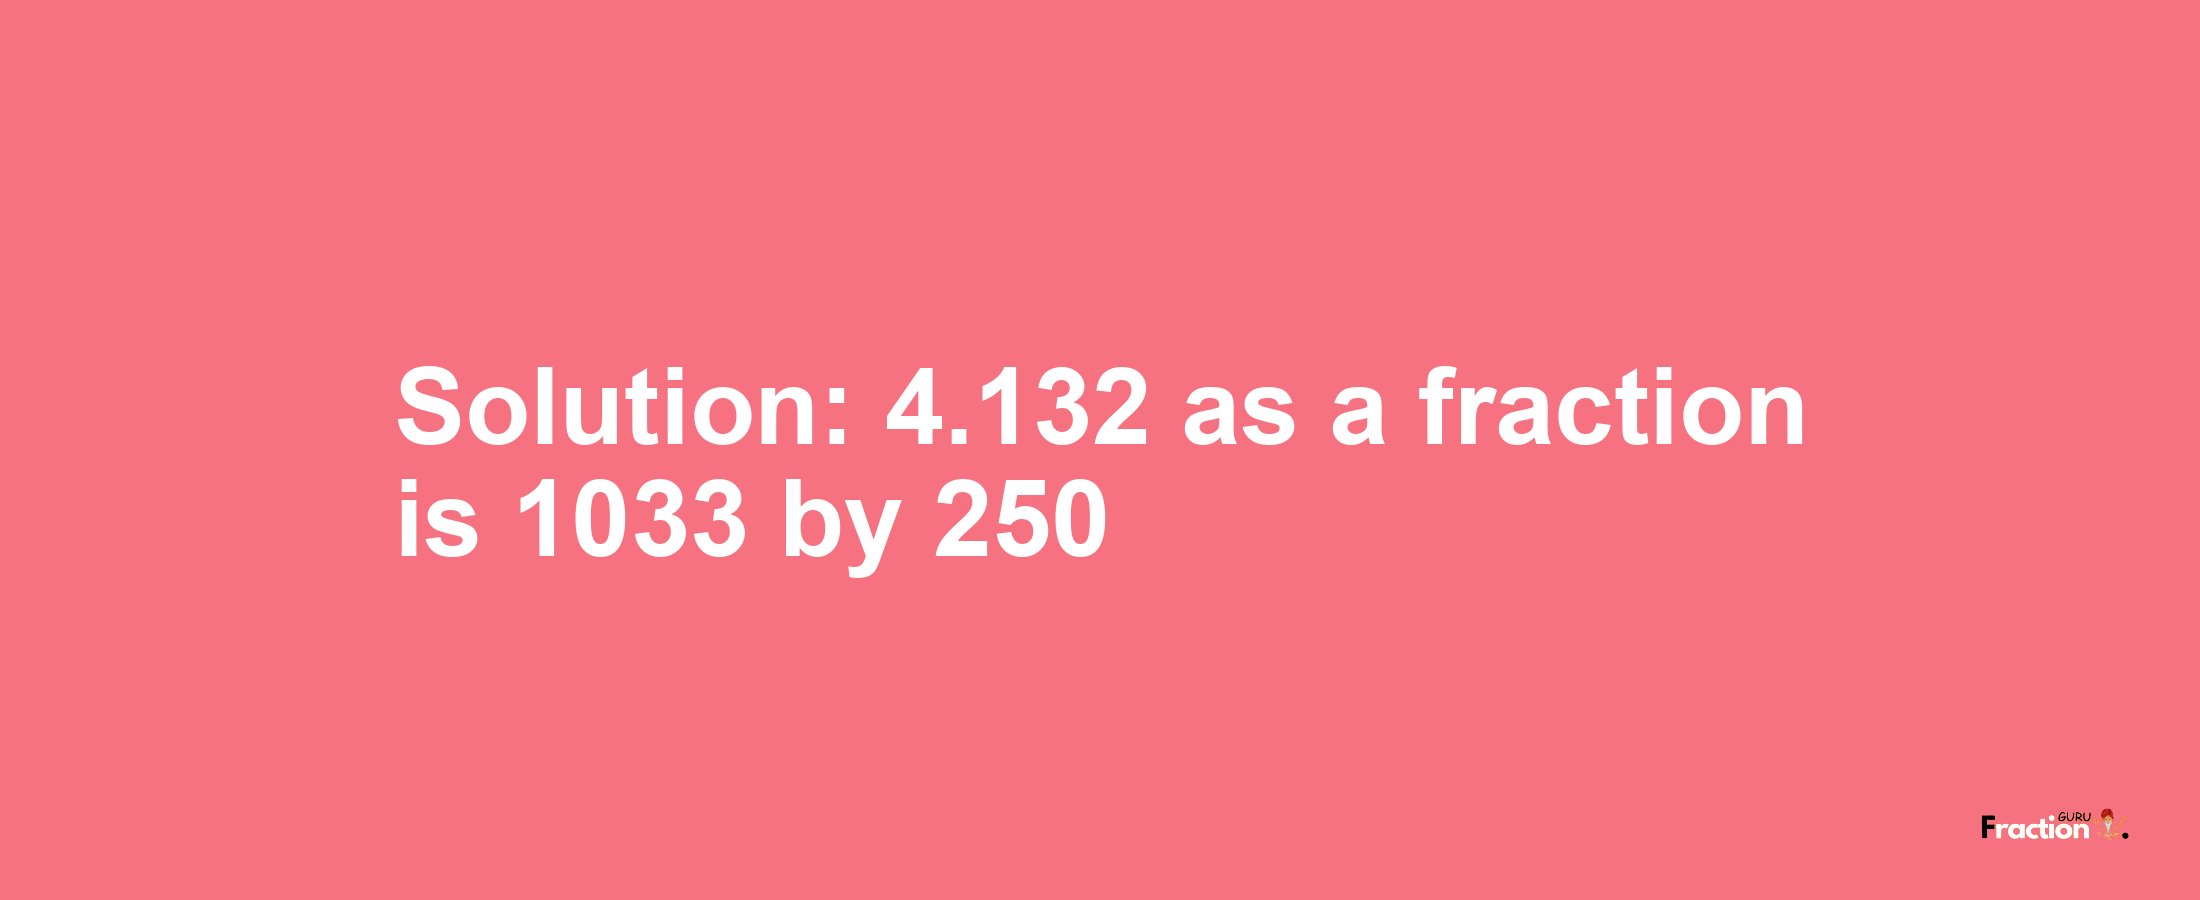 Solution:4.132 as a fraction is 1033/250